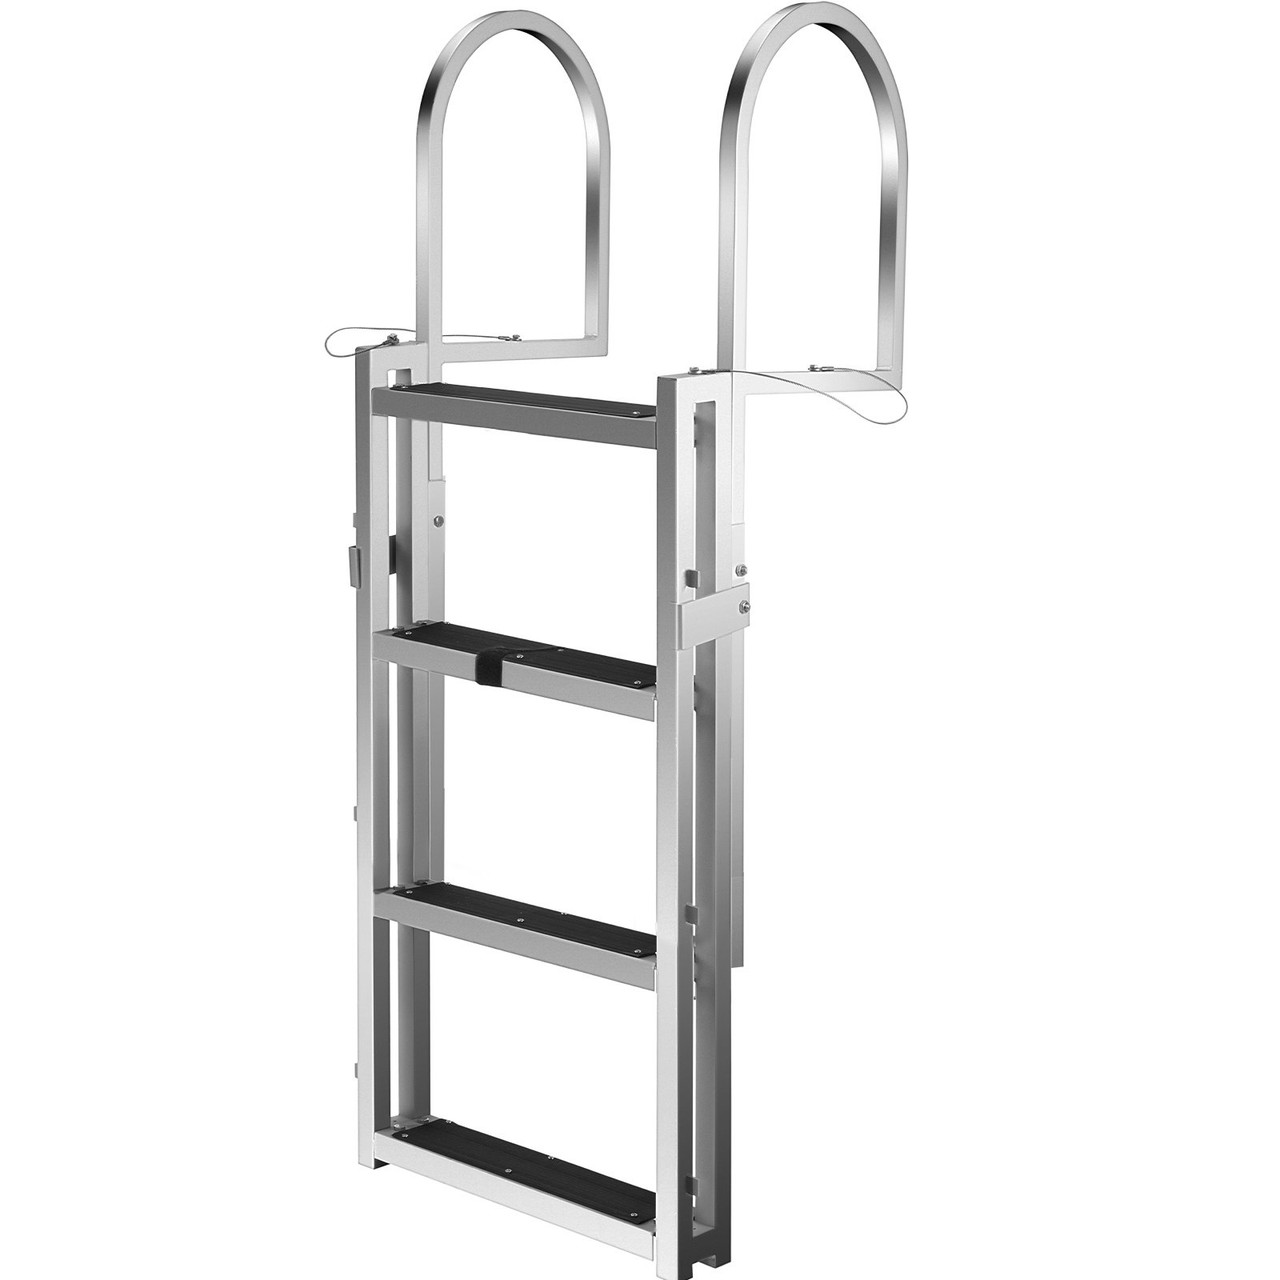 Retractable Dock Ladder with Rubber Mat, Pontoon Boat Ladder 41"-65" Adjustable Height, Swim Ladder Aluminum 4 Step, Each Step 20.5" x 4", 350Lbs Load, for Lake, Marine Boarding, Pool